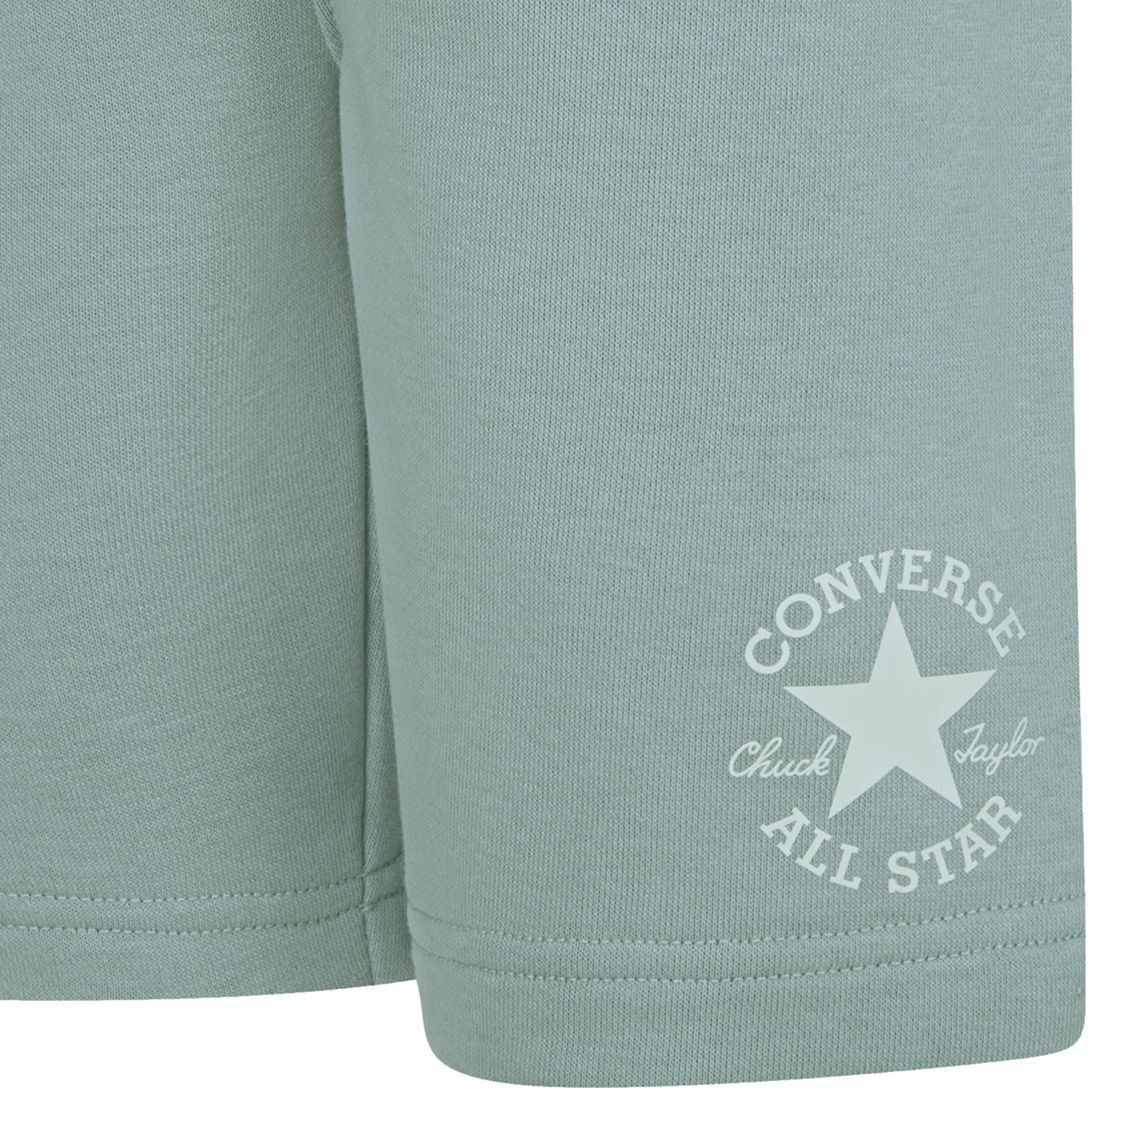 Converse Little Boys Sustainable Core Tee and Print Shorts 2 pc. Set - Image 6 of 6